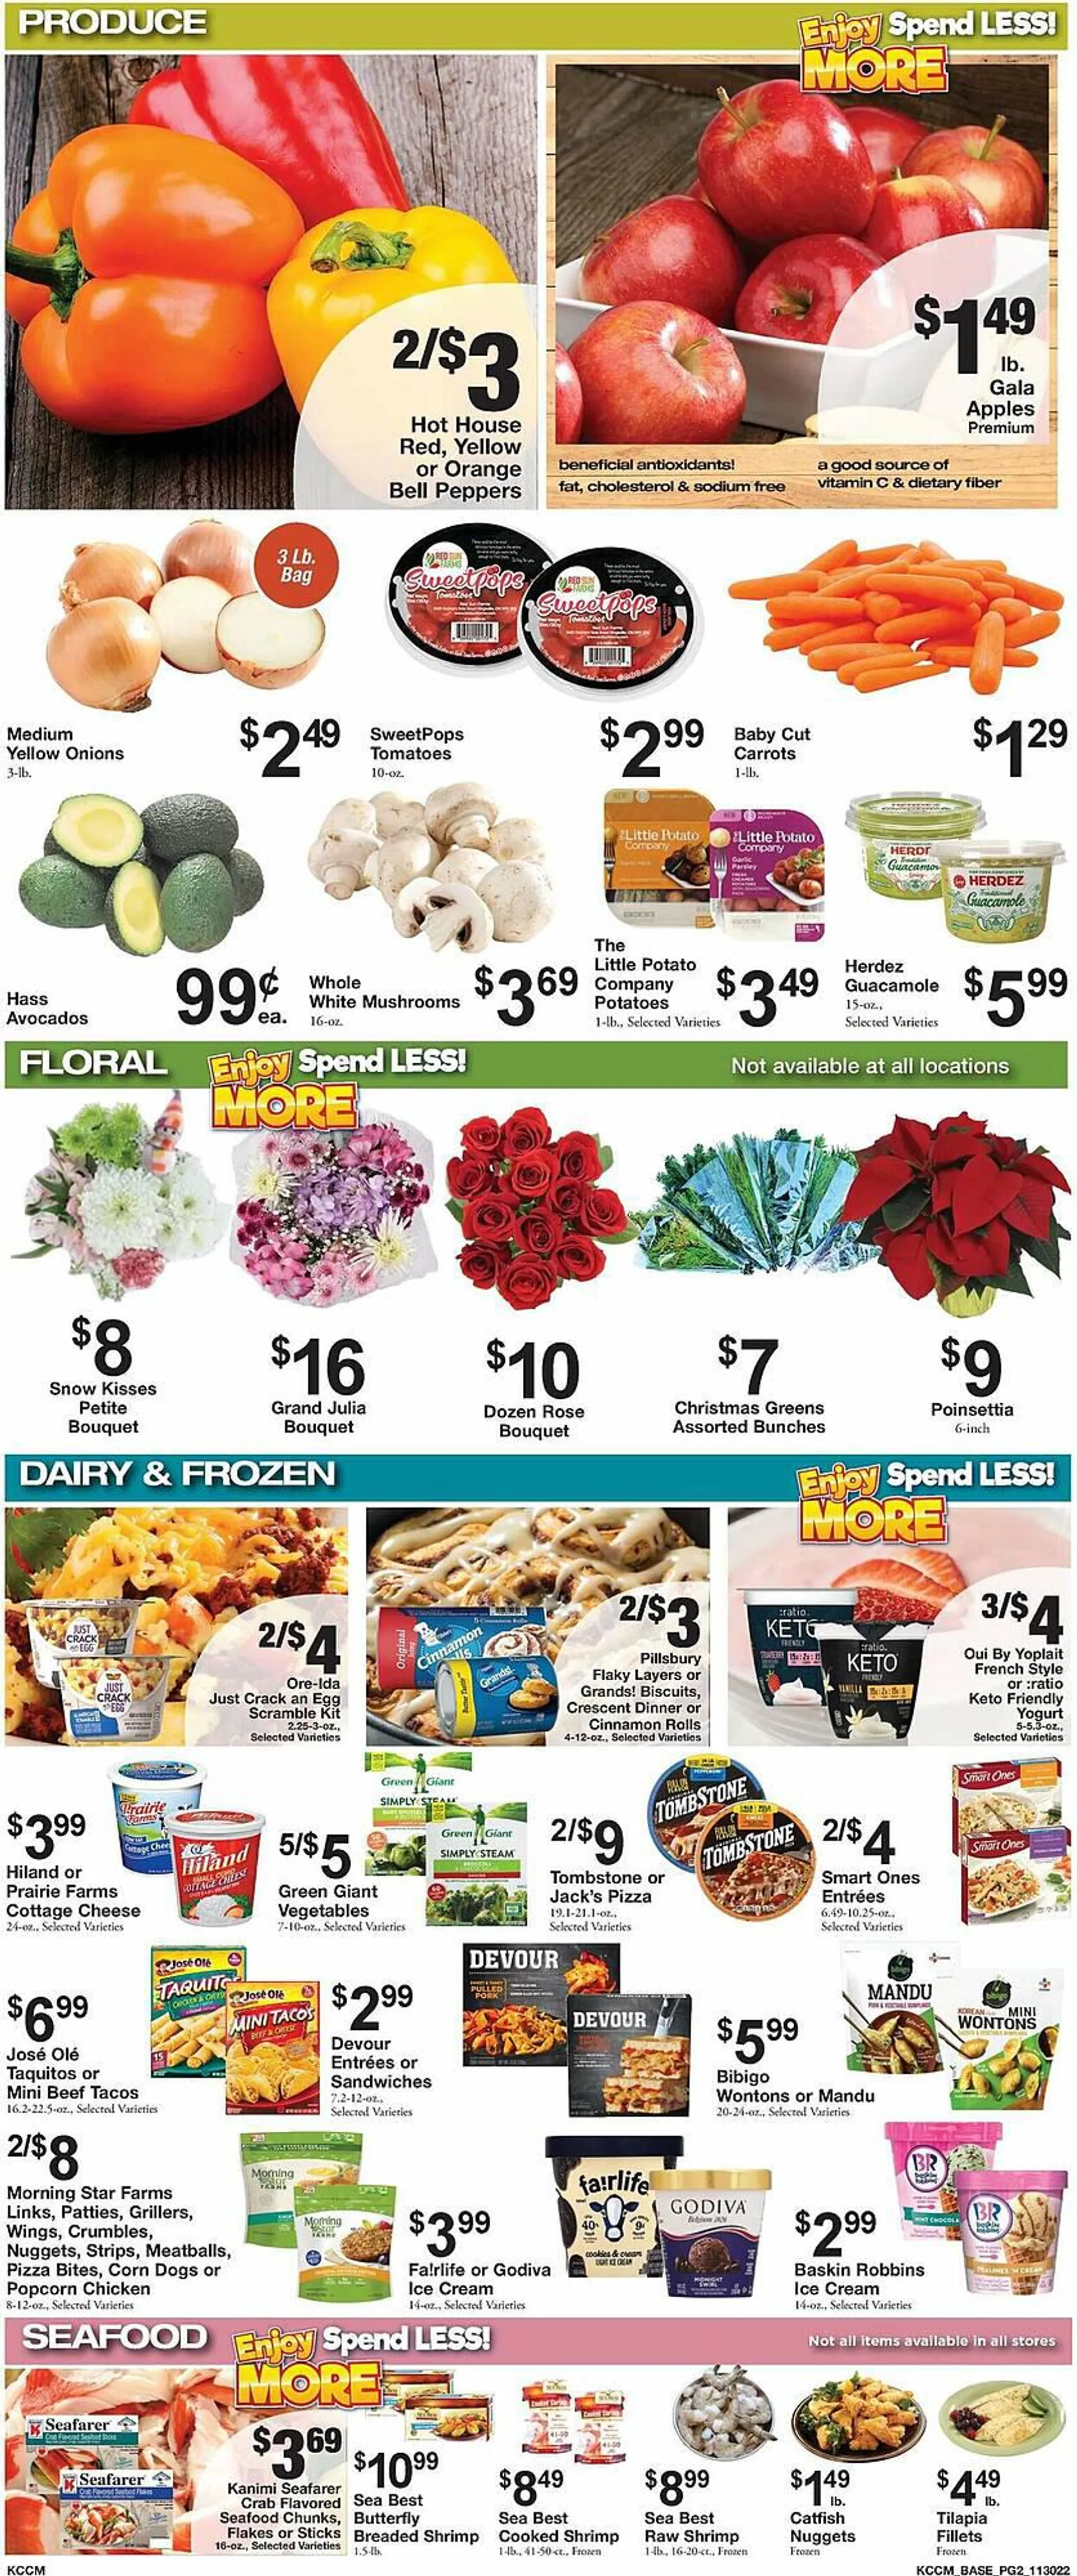 County Market Weekly Ad - 2